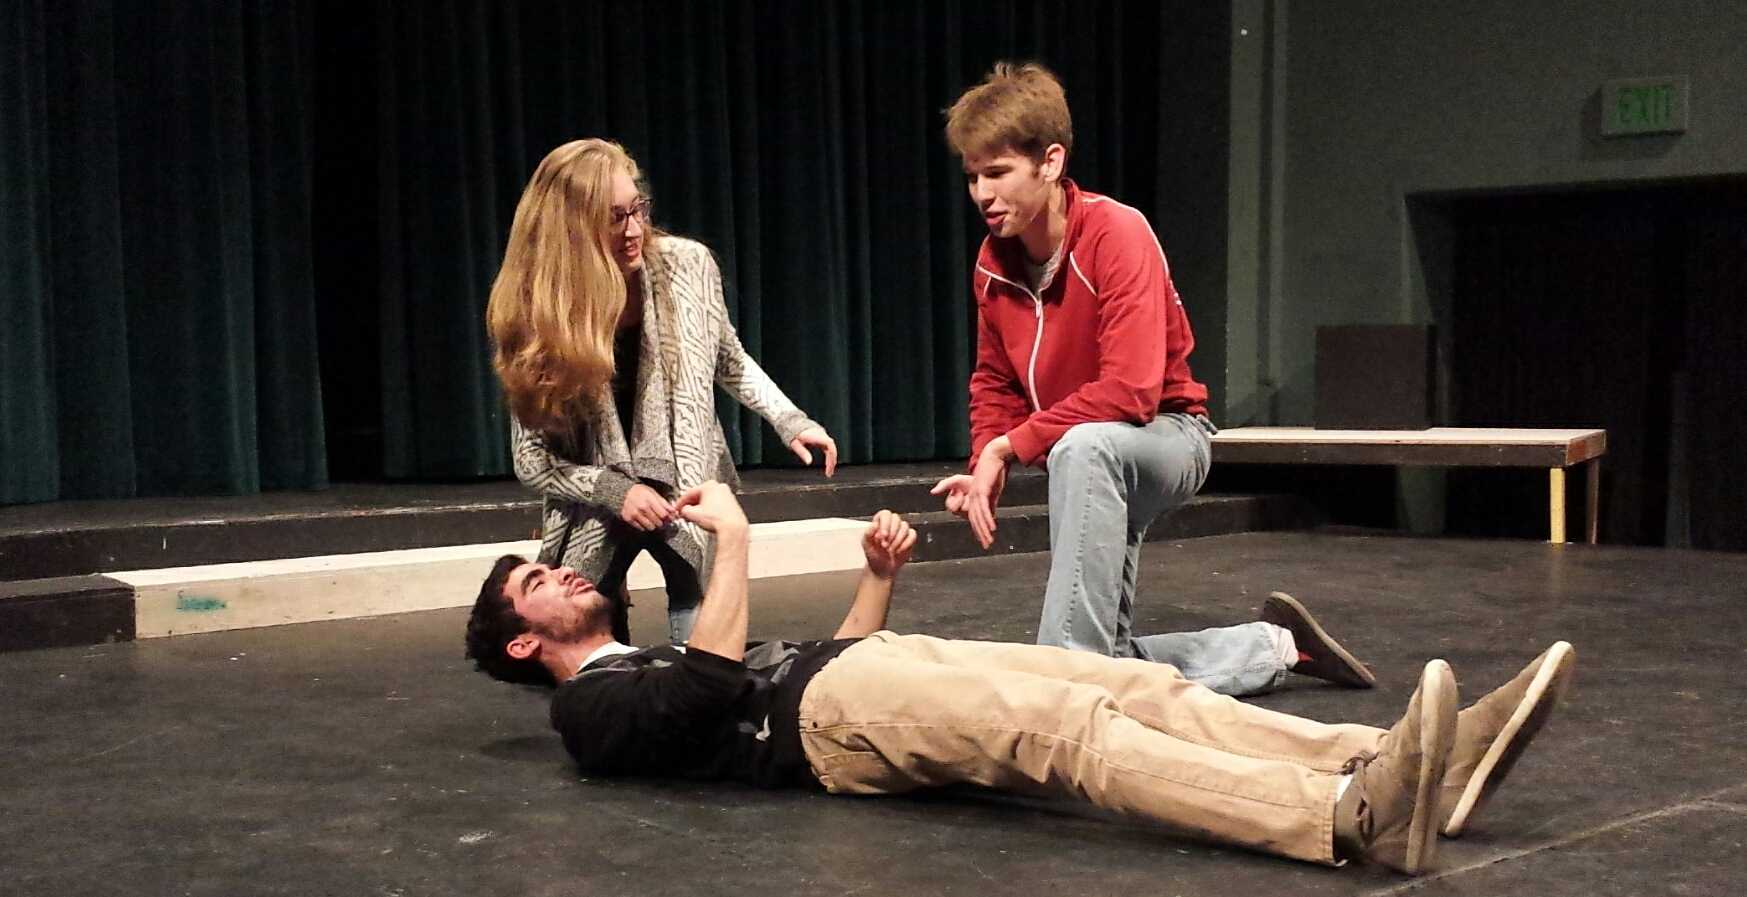 Sophomores Andrea O'Riordan and Joey Kellison-Linn attempt to revive junior Paul Bleich in an improv game called "Countdown," as practice for the upcoming competition on Friday. O'Riordan and Kellison-Linn will be among the six troupe members competing. Photo by Hannah Nguyen. 